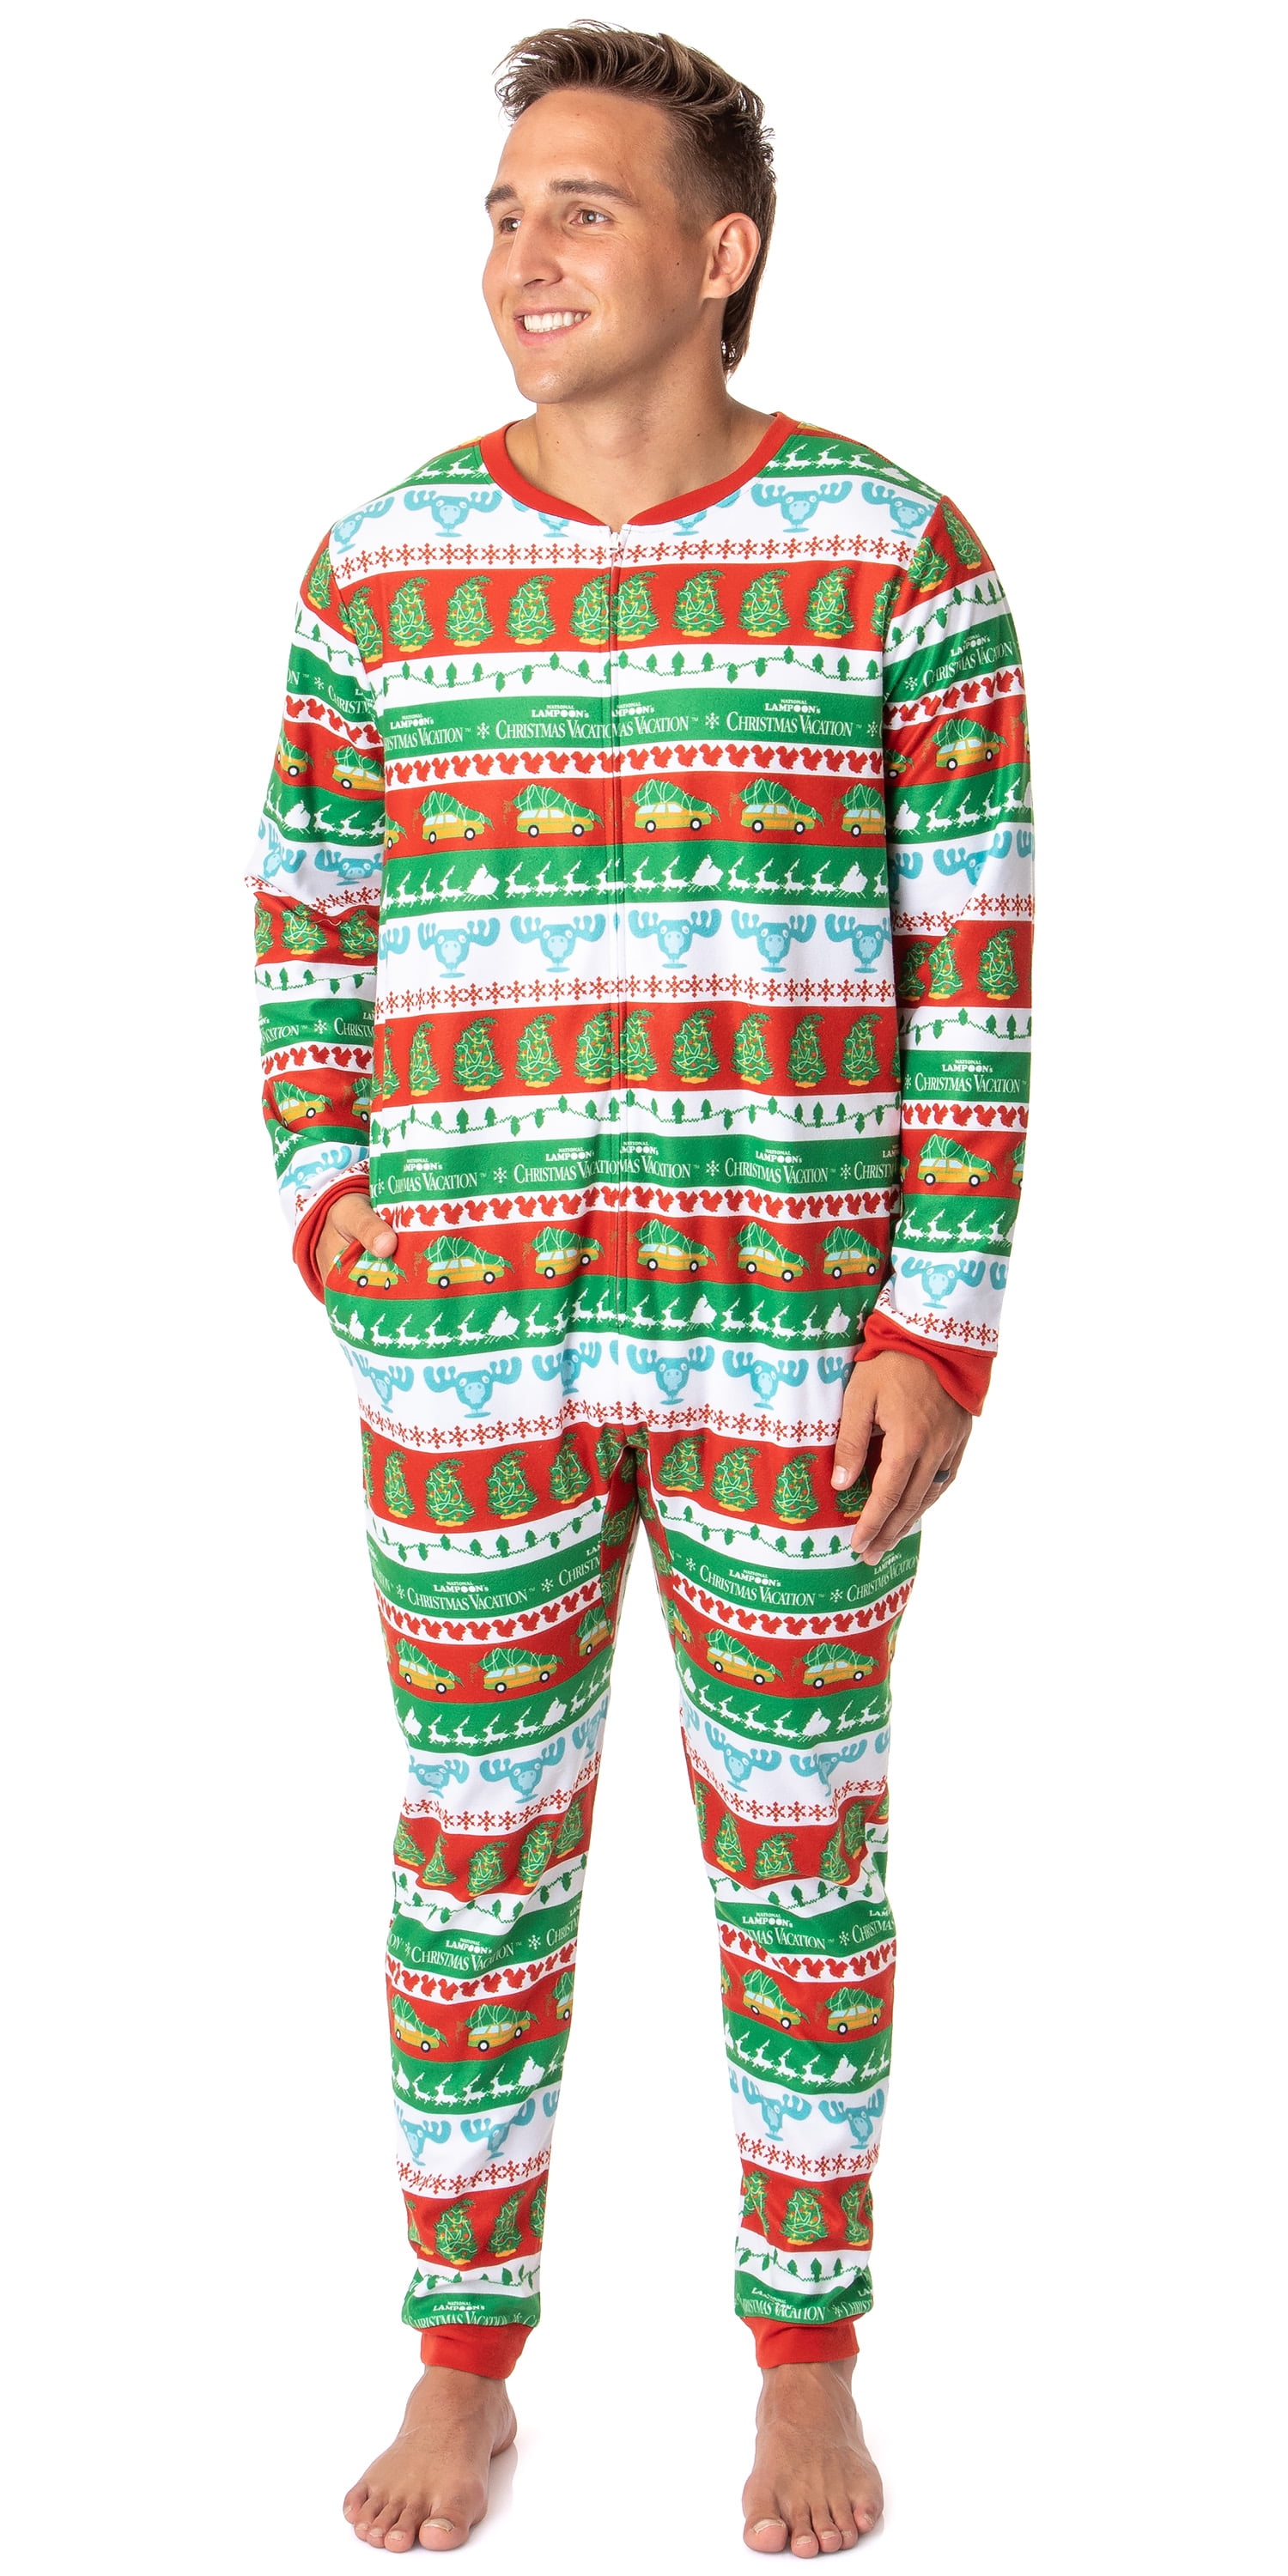 National Lampoon's Christmas Vacation Mens' Movie Film Union Suit (S/M)